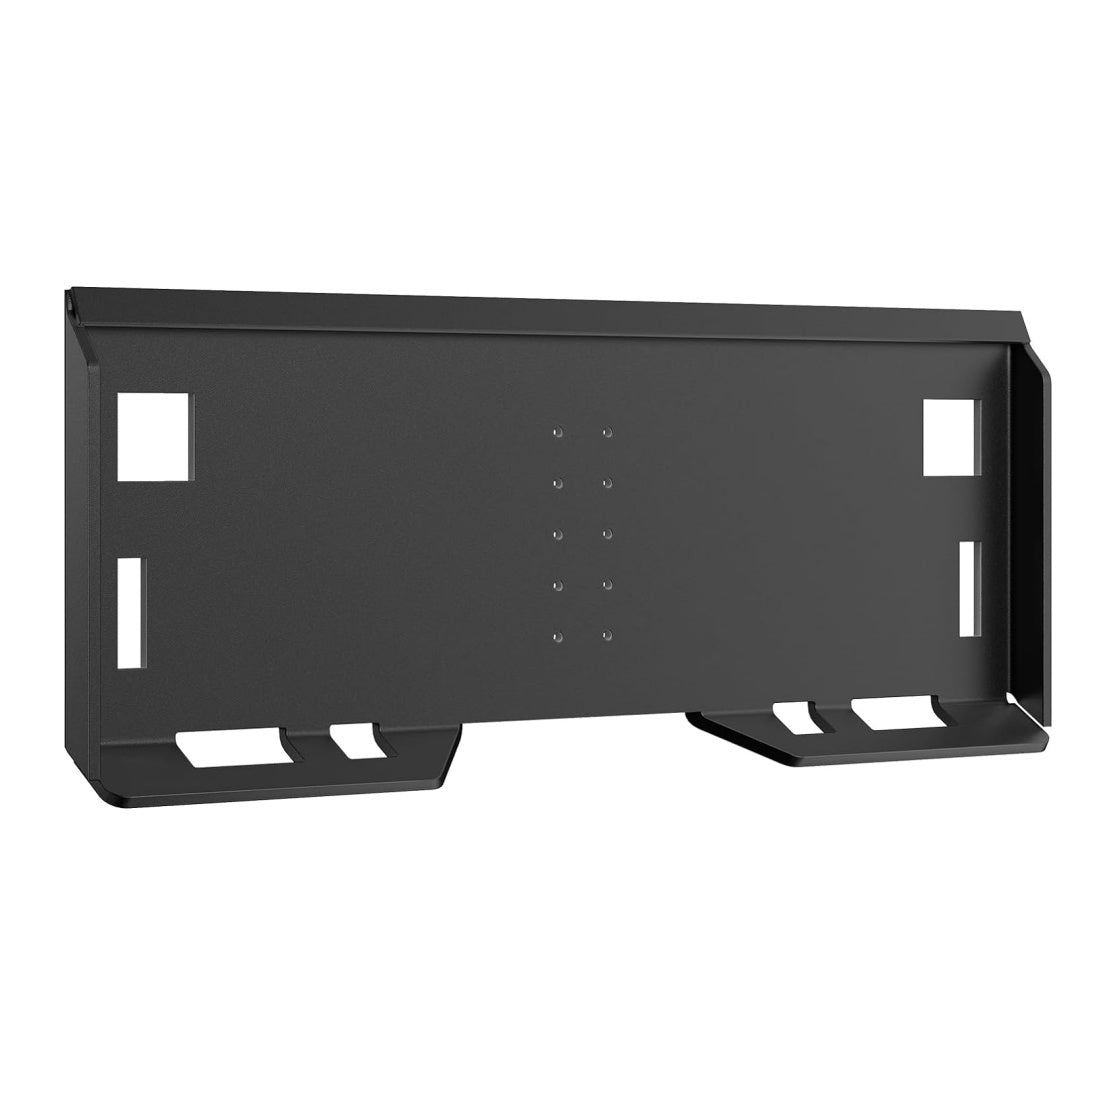 1/4 Inch Thick Universal Skid Steer Mount Plate w/Holes, Skid Steer Plate Attachment 3000LBS Weight Capacity Quick Attach Mount Plate Compatible with Kubota, Bobcat Skid Steers and Tractors